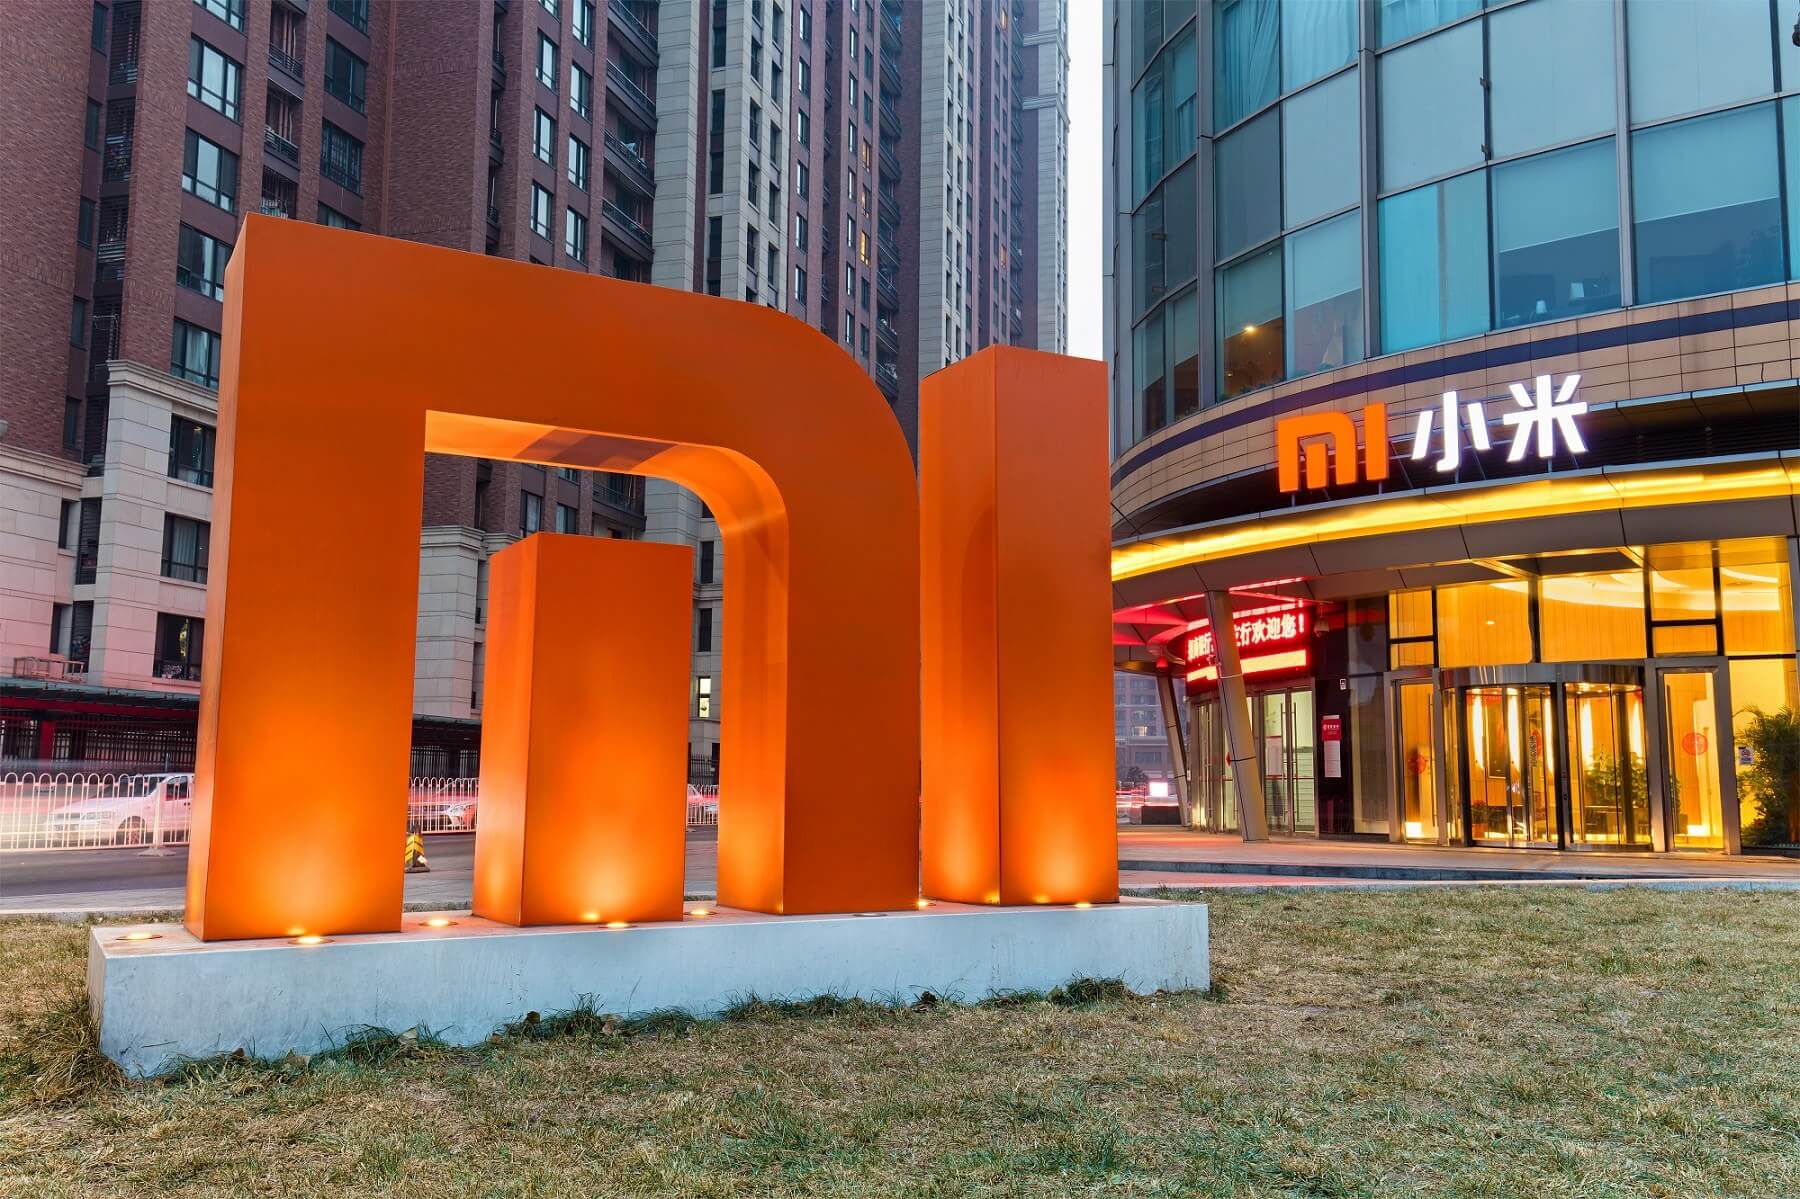 US agrees not to blacklist Xiaomi, undoing one of Trump's final orders